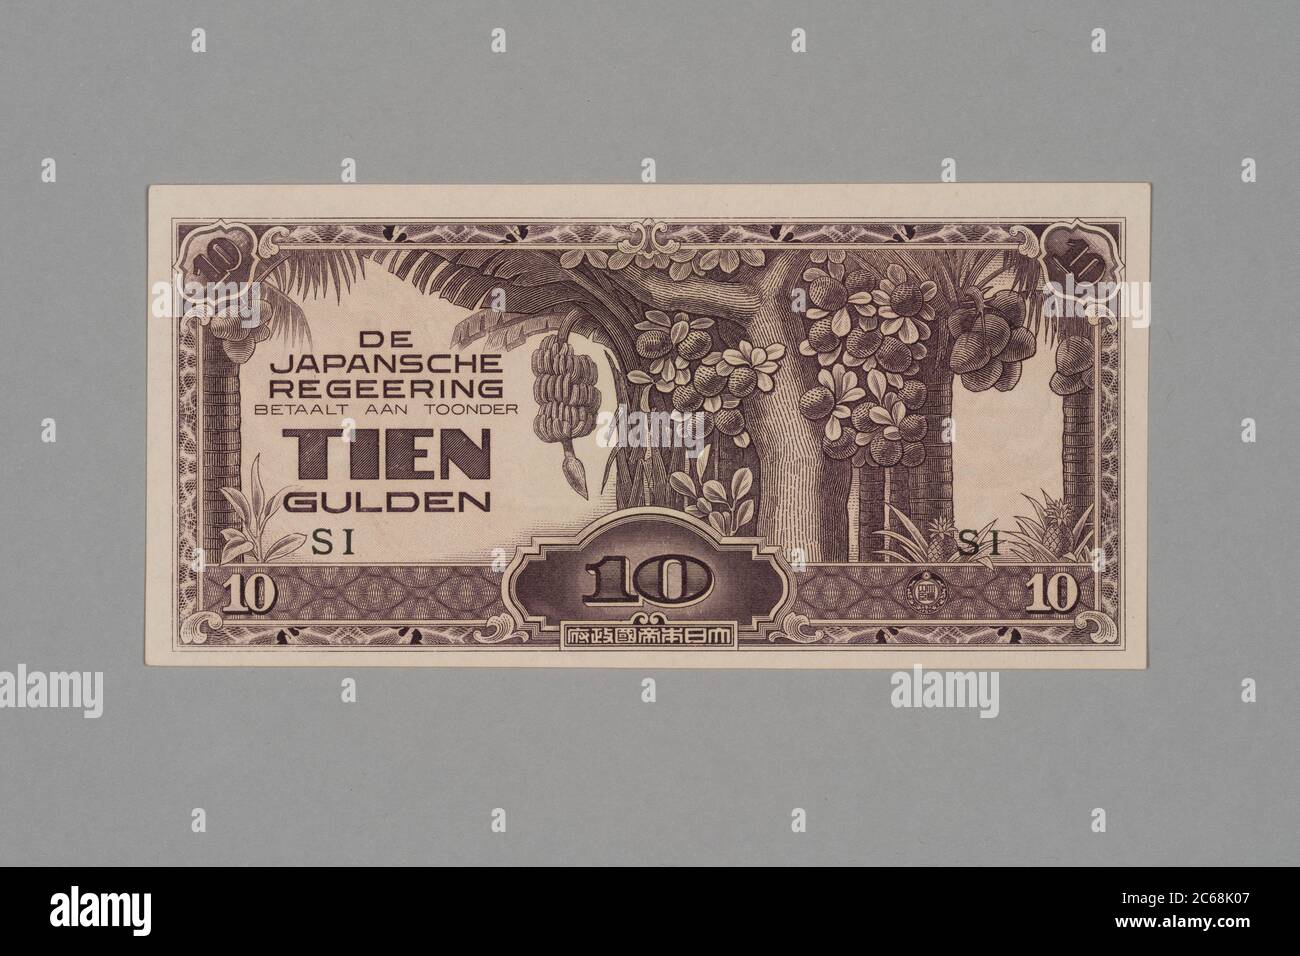 Japanese government-issued currency in the Dutch East Indies 10 Gulden banknote, 1942, Private Collection Stock Photo